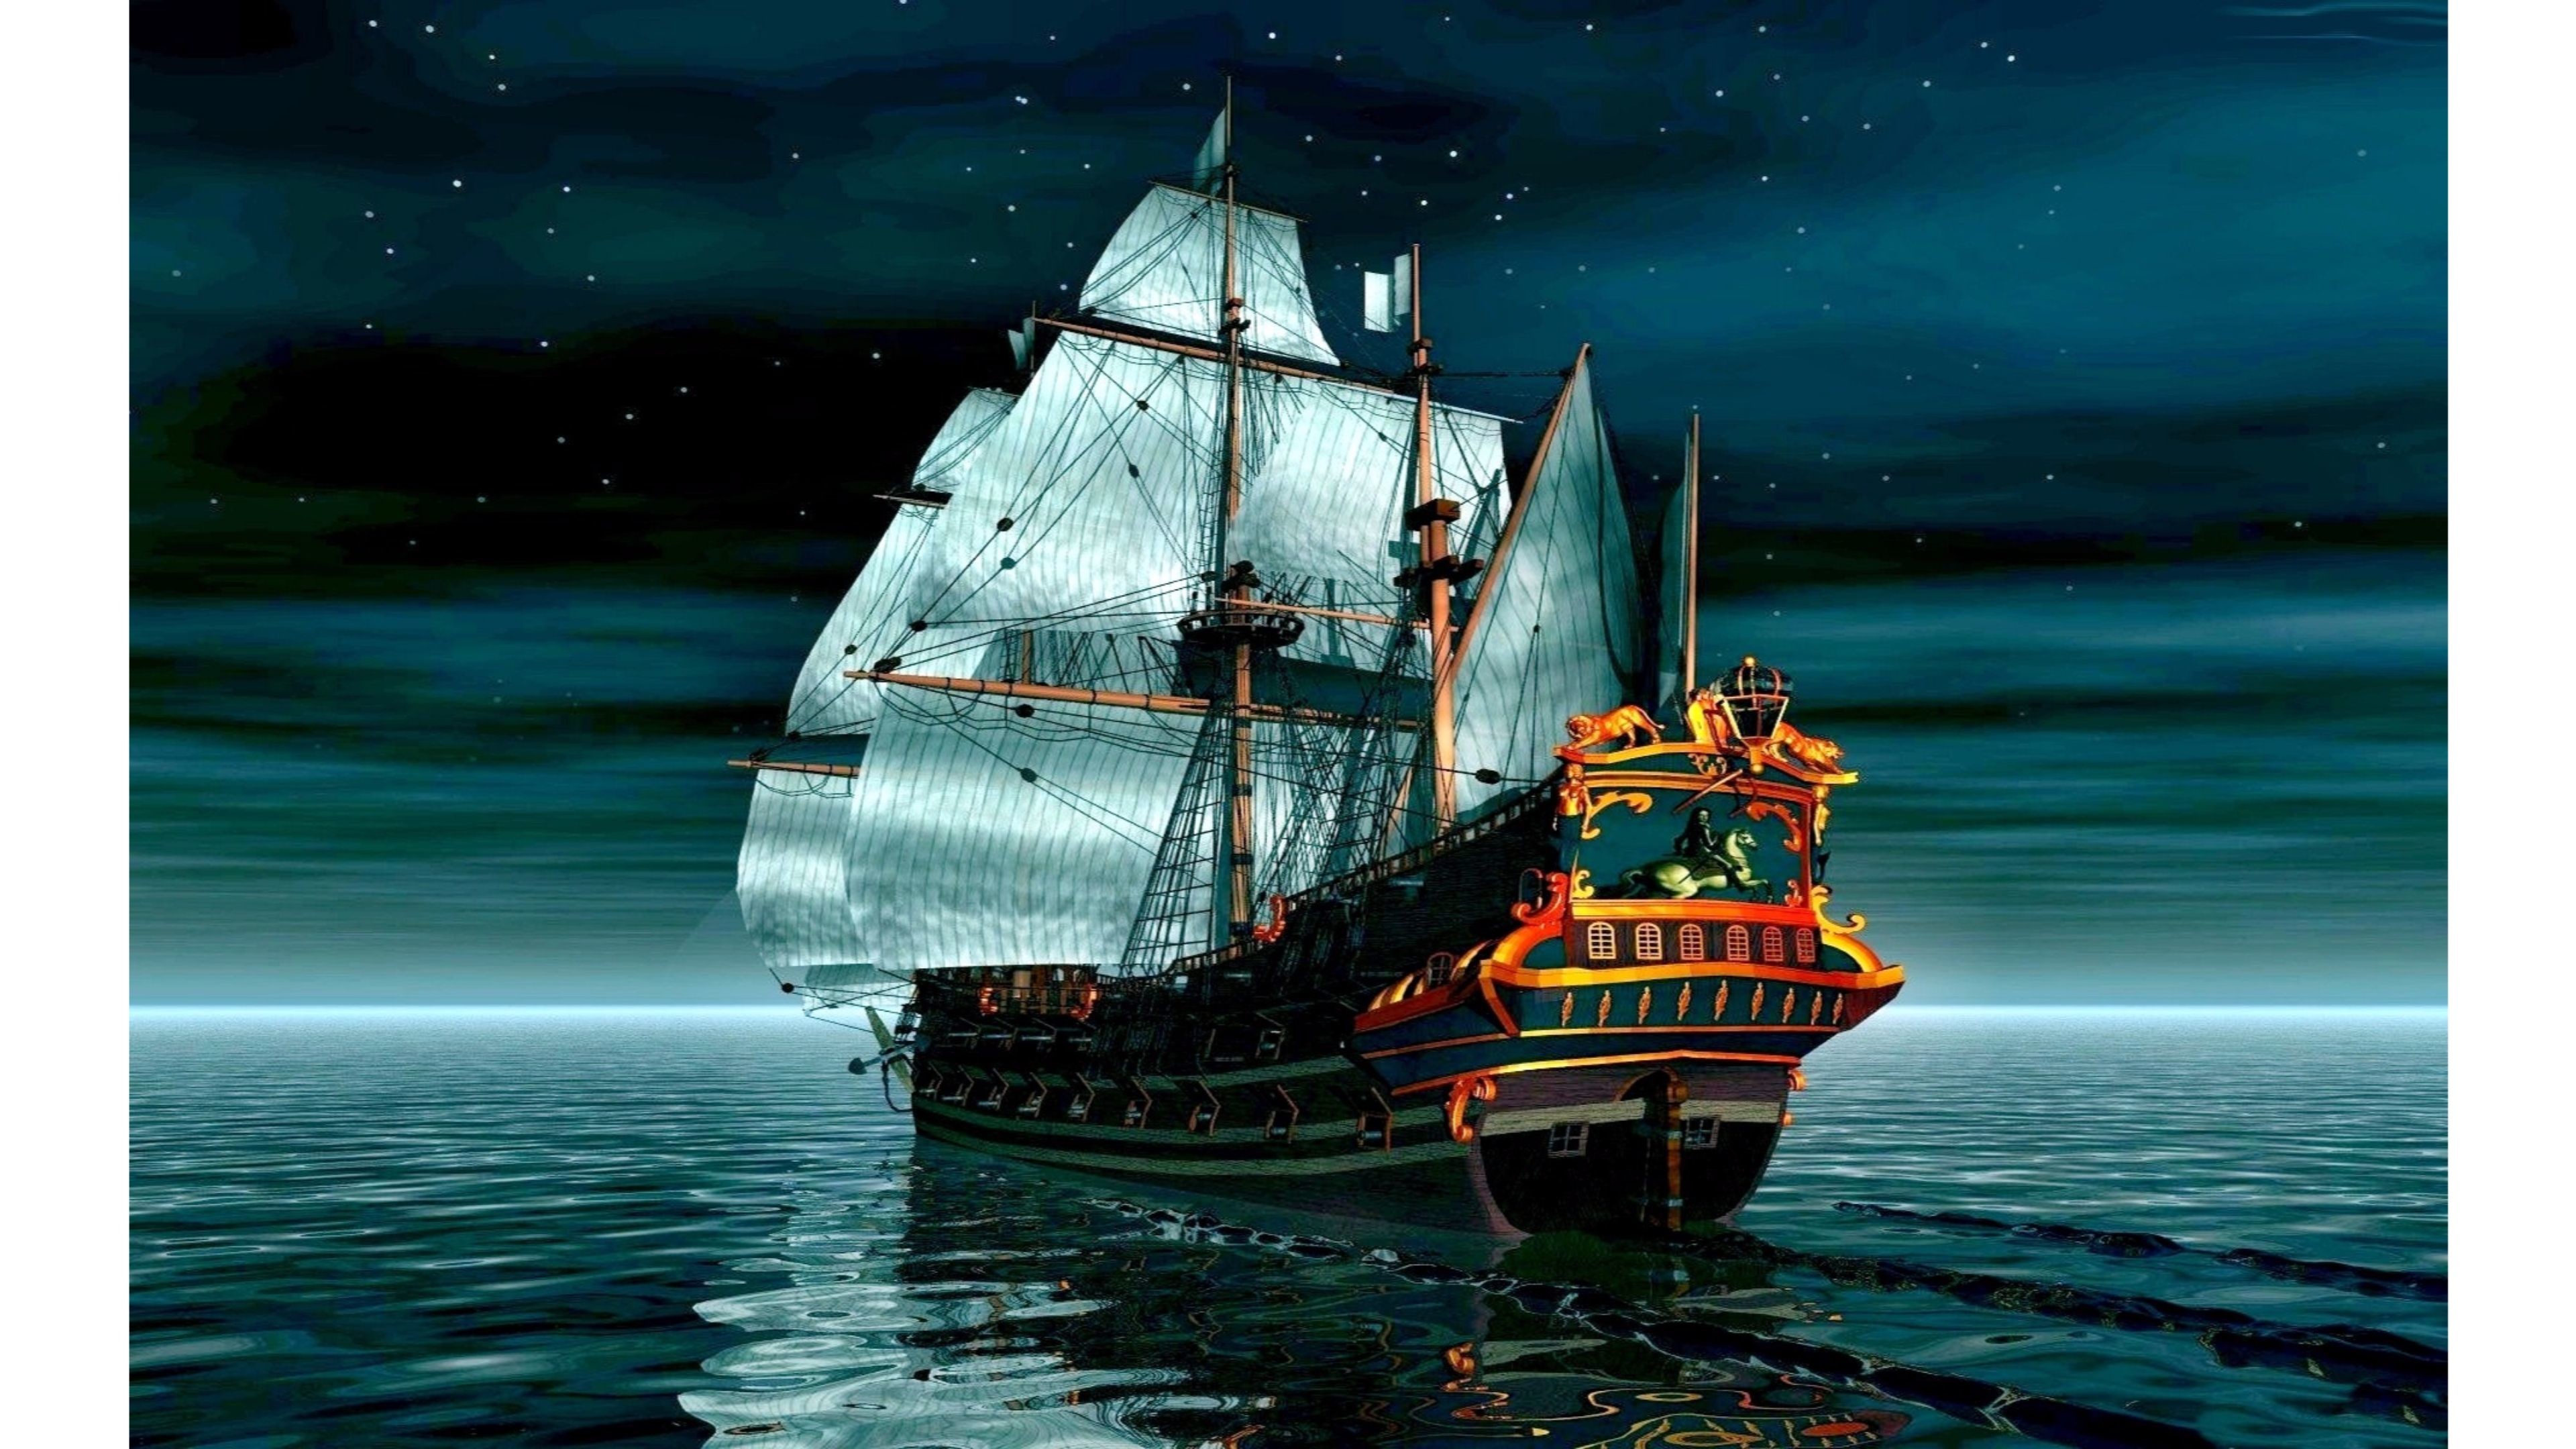 3840x2160 Pirate ship closing to the shore wallpaper Fantasy wallpapers